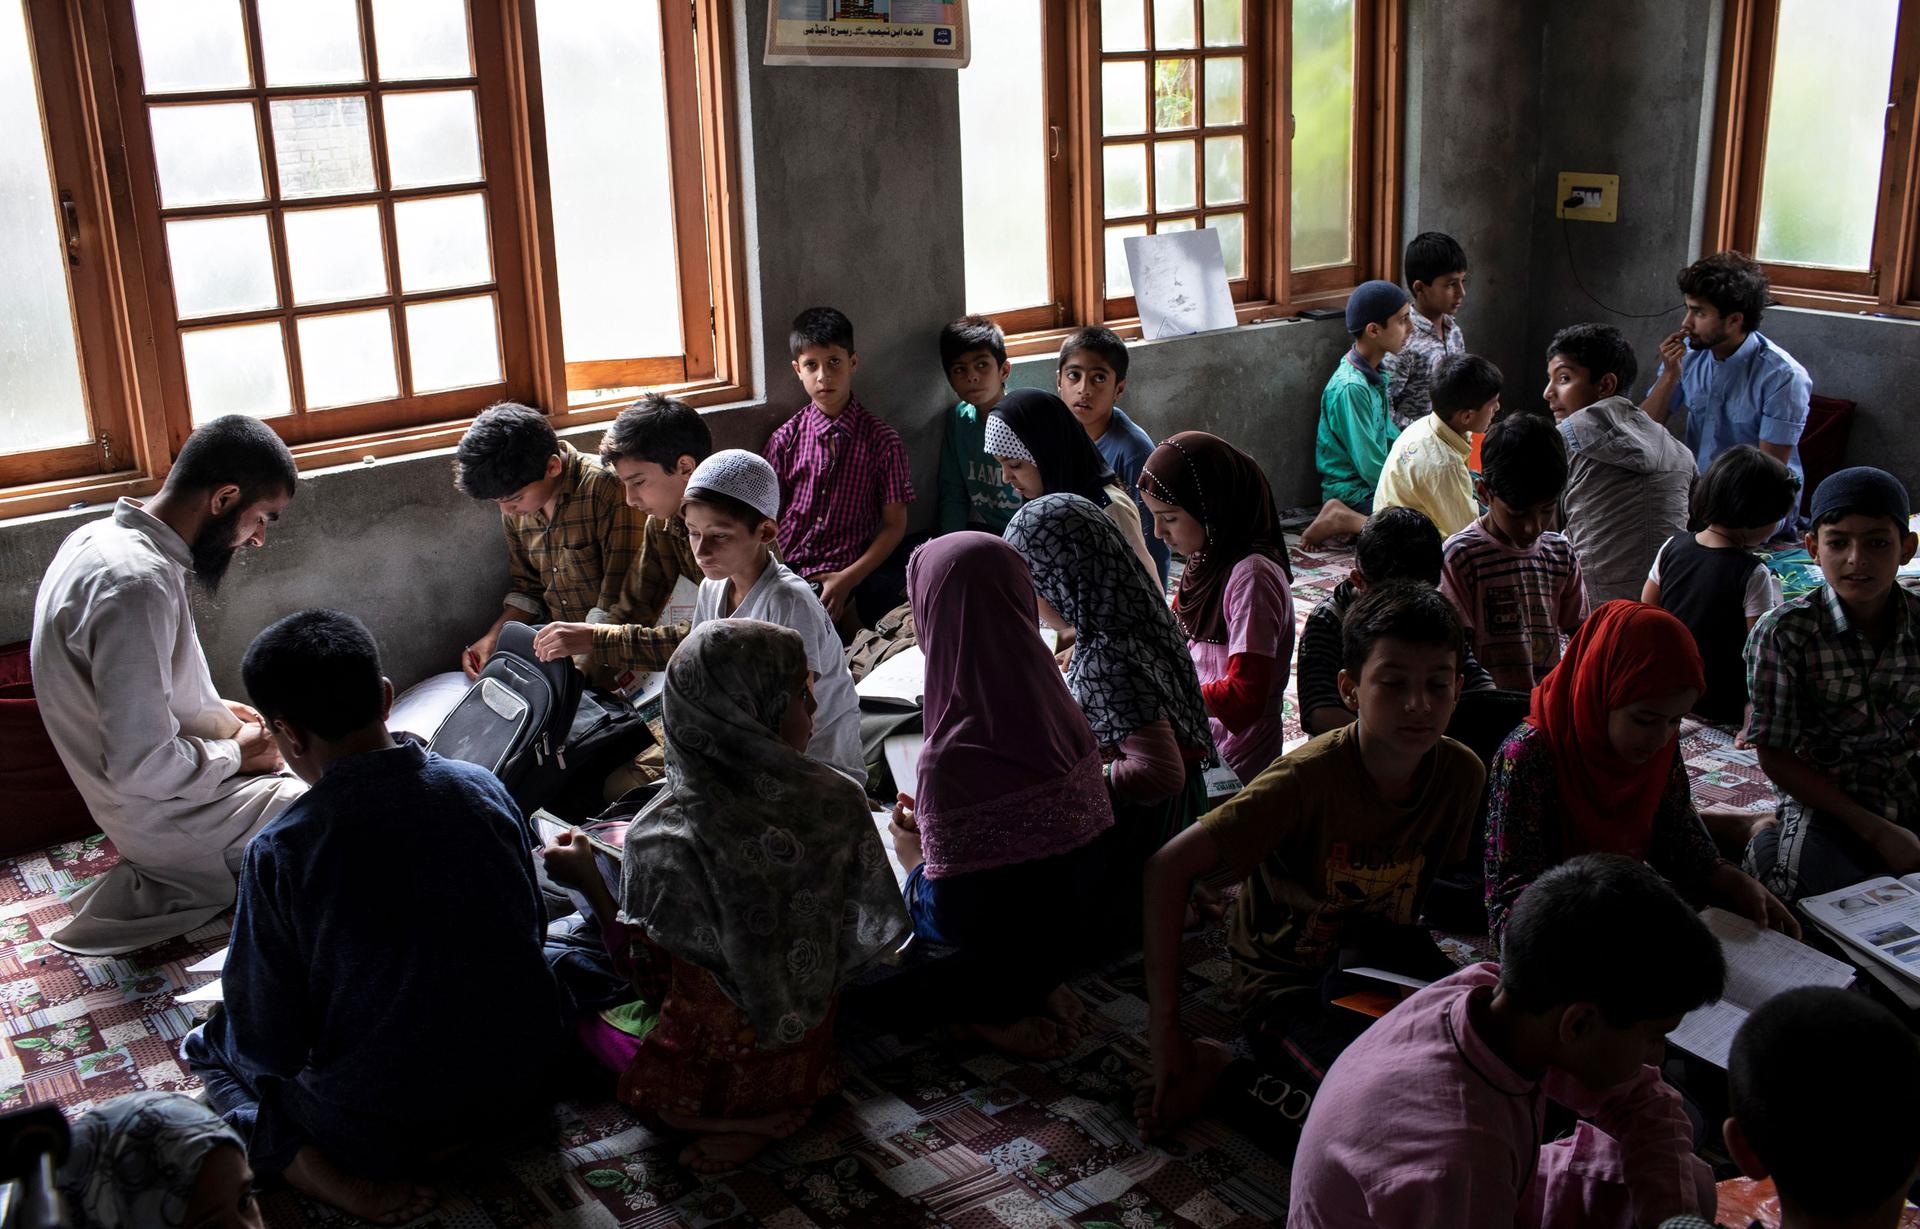 A classroom of children are shown sitting on the floor and doing school work.